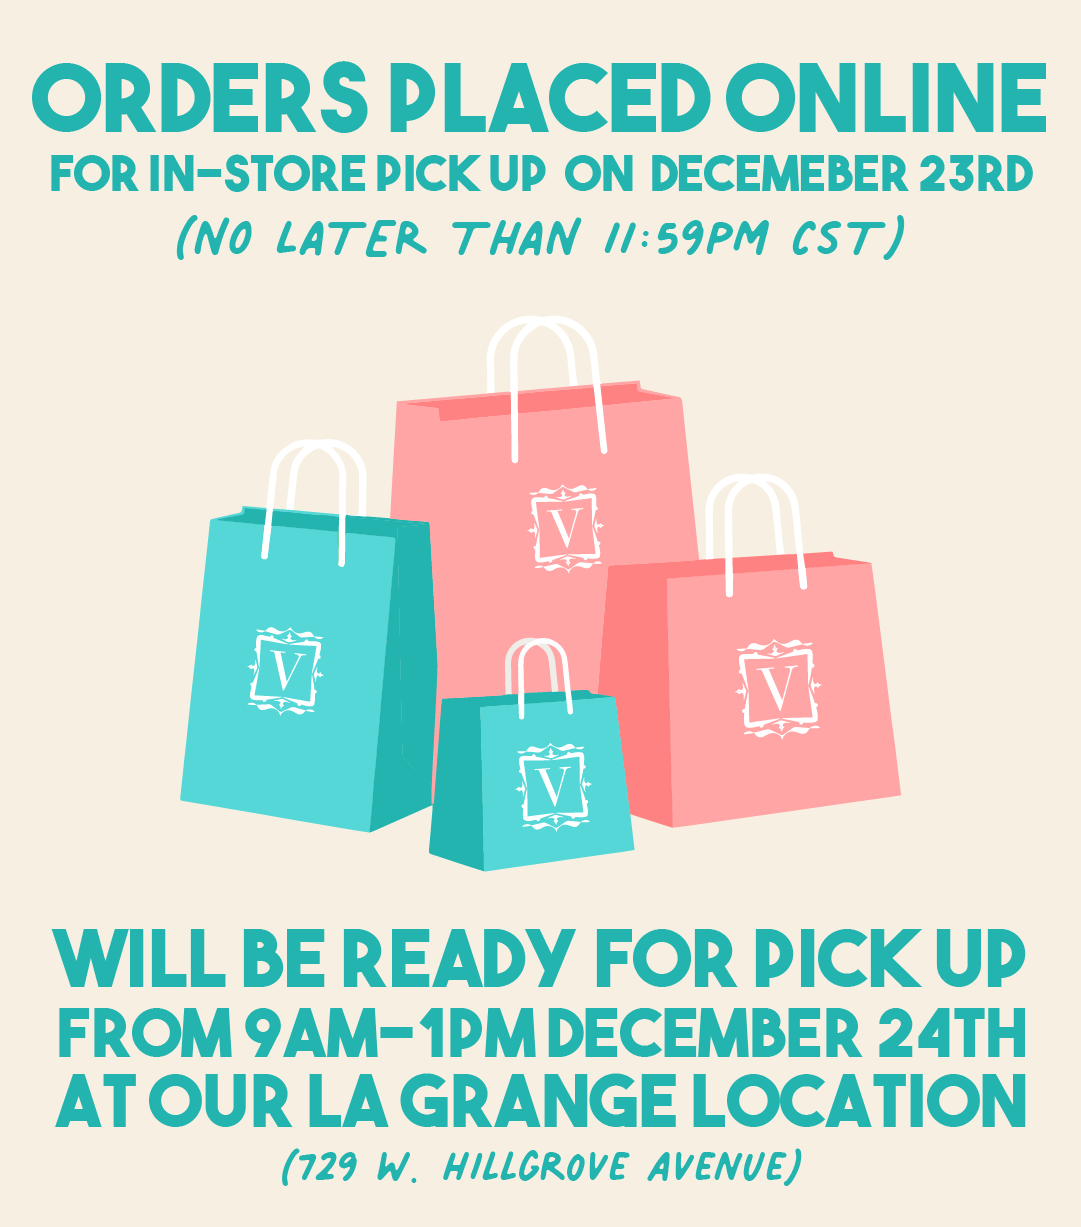 ORDERS PLACED ONLINE FOR IN-STORE PICKUP ON DECEMEBER 23RD NO LATER THAN 11:59PM ST WILL BE READY FOR PICK UP FROM 9AM-1PMDECEMBER 24TH ATOUR LA GRANGE LOCATION 729 W. HILLGROVE AVENUE 